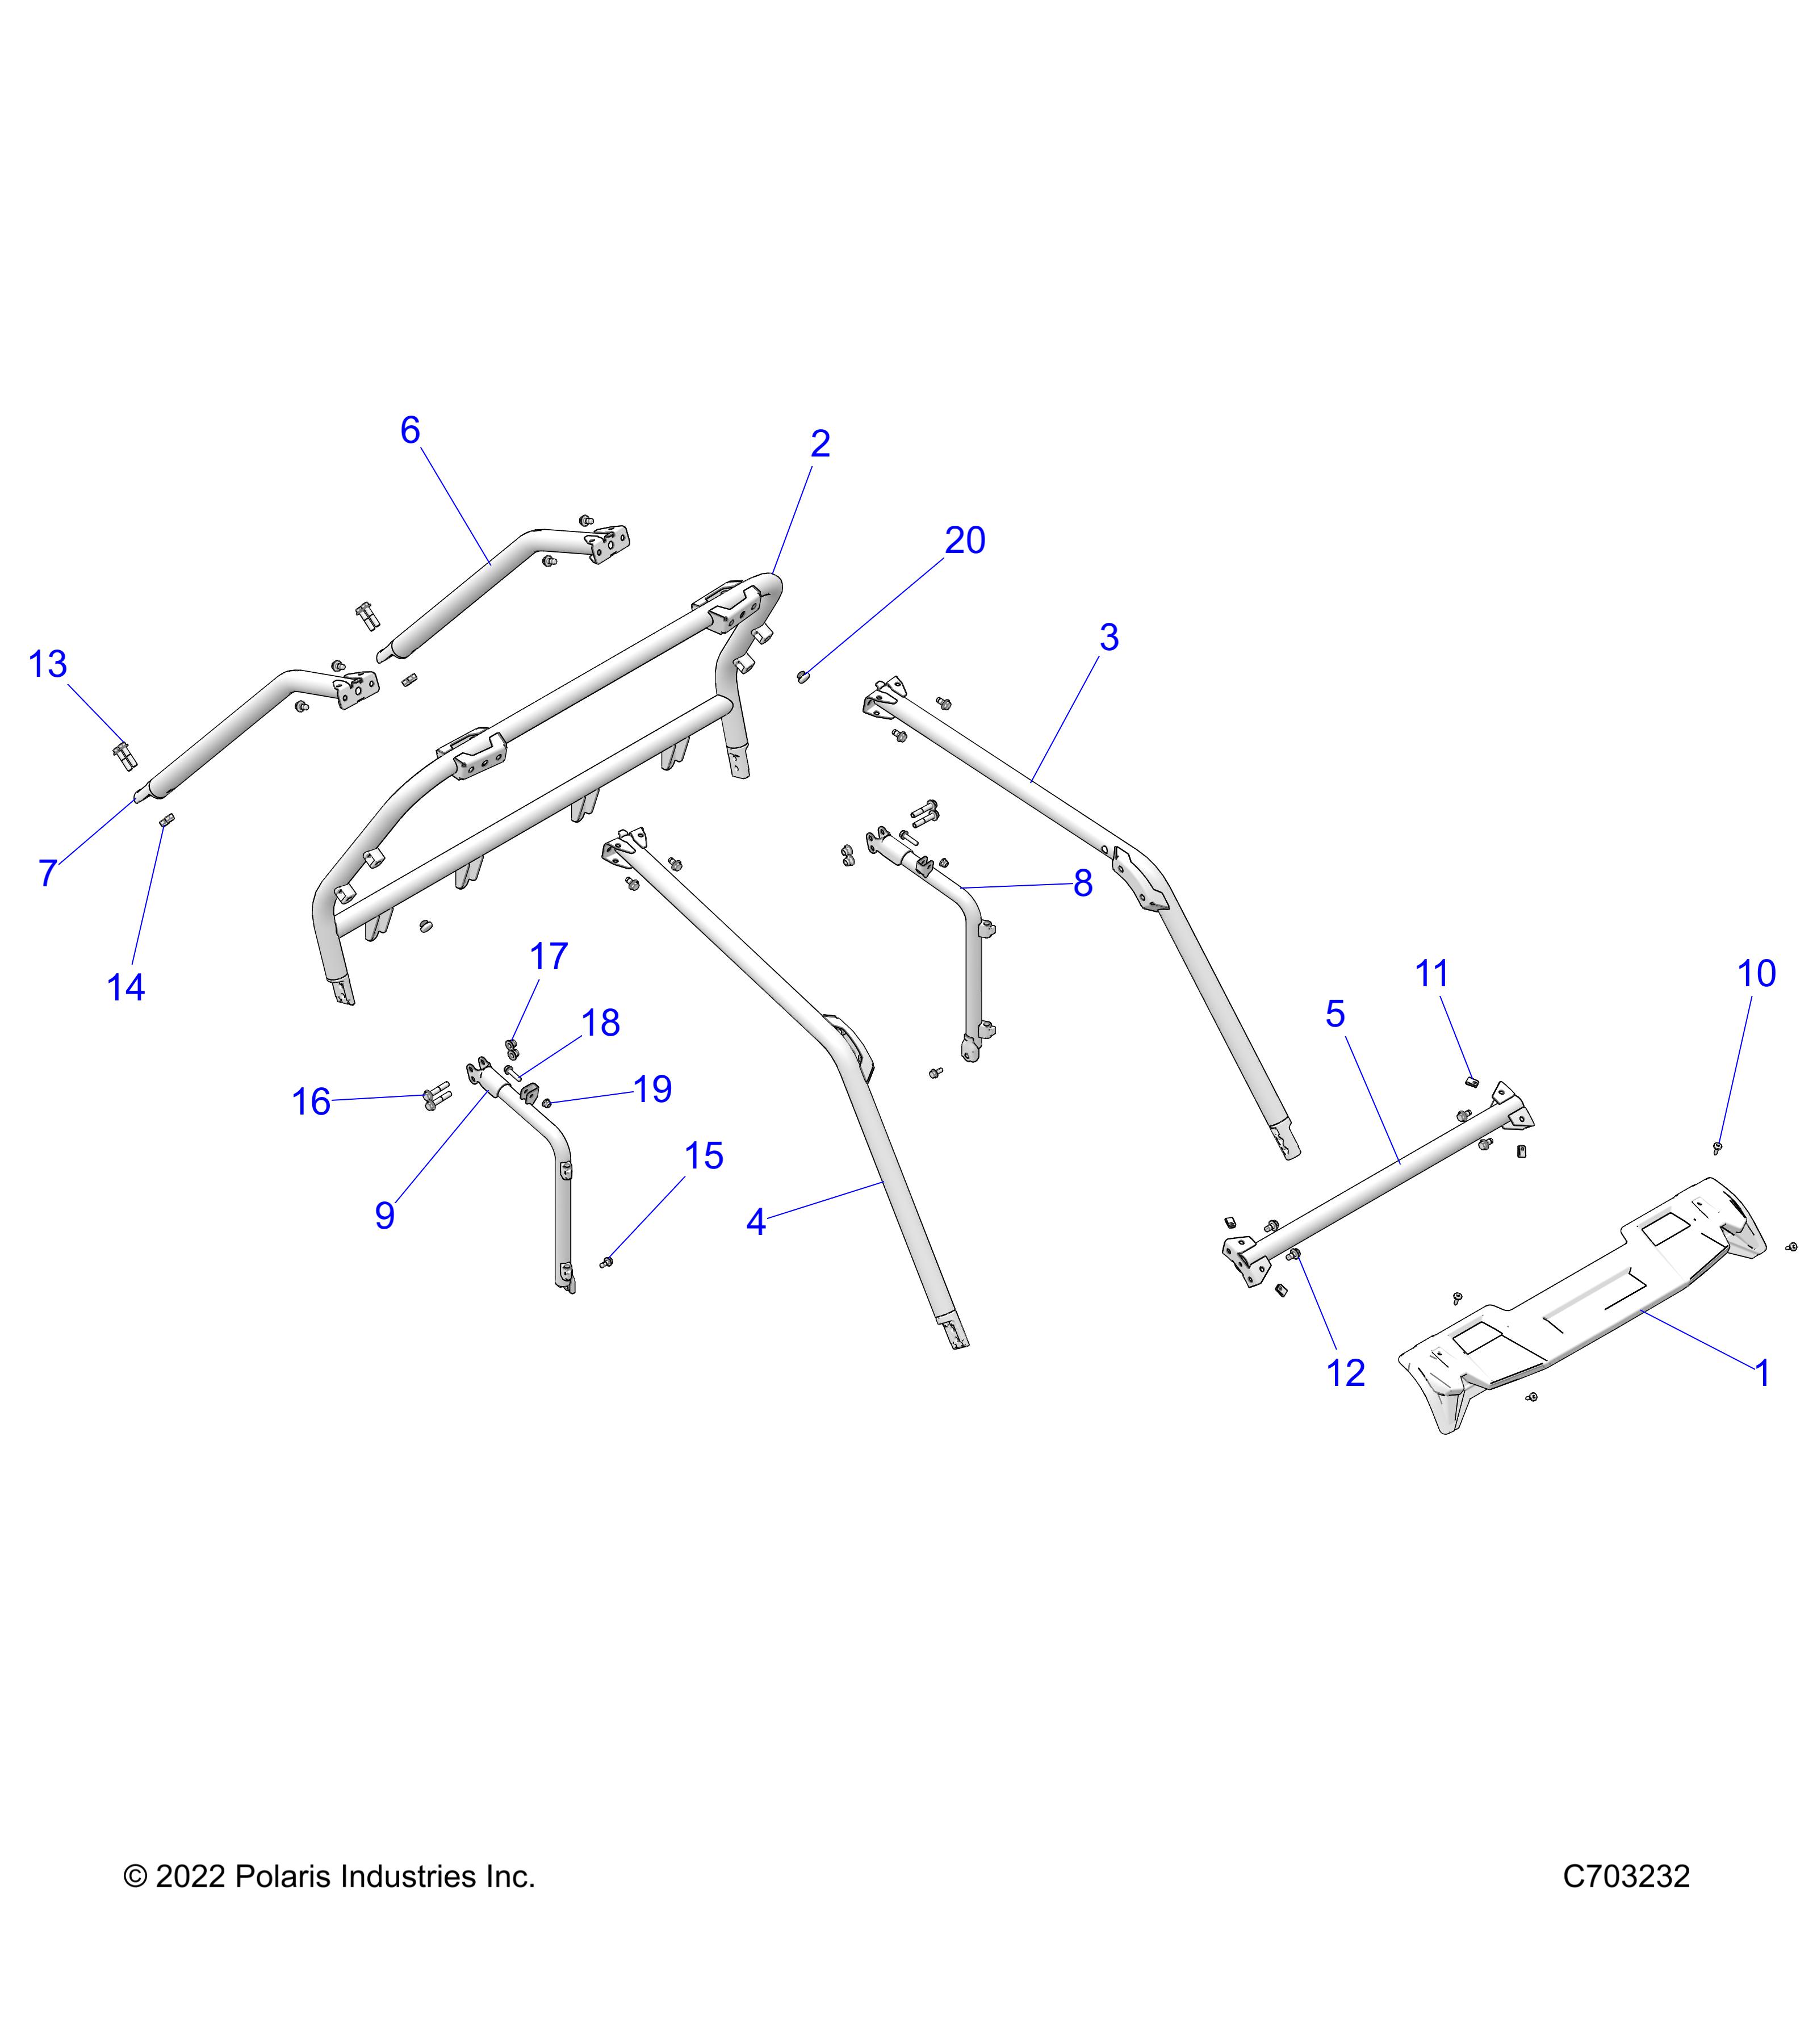 Part Number : 1020753-458 CAB FRAME SECTION REAR RIGHT S